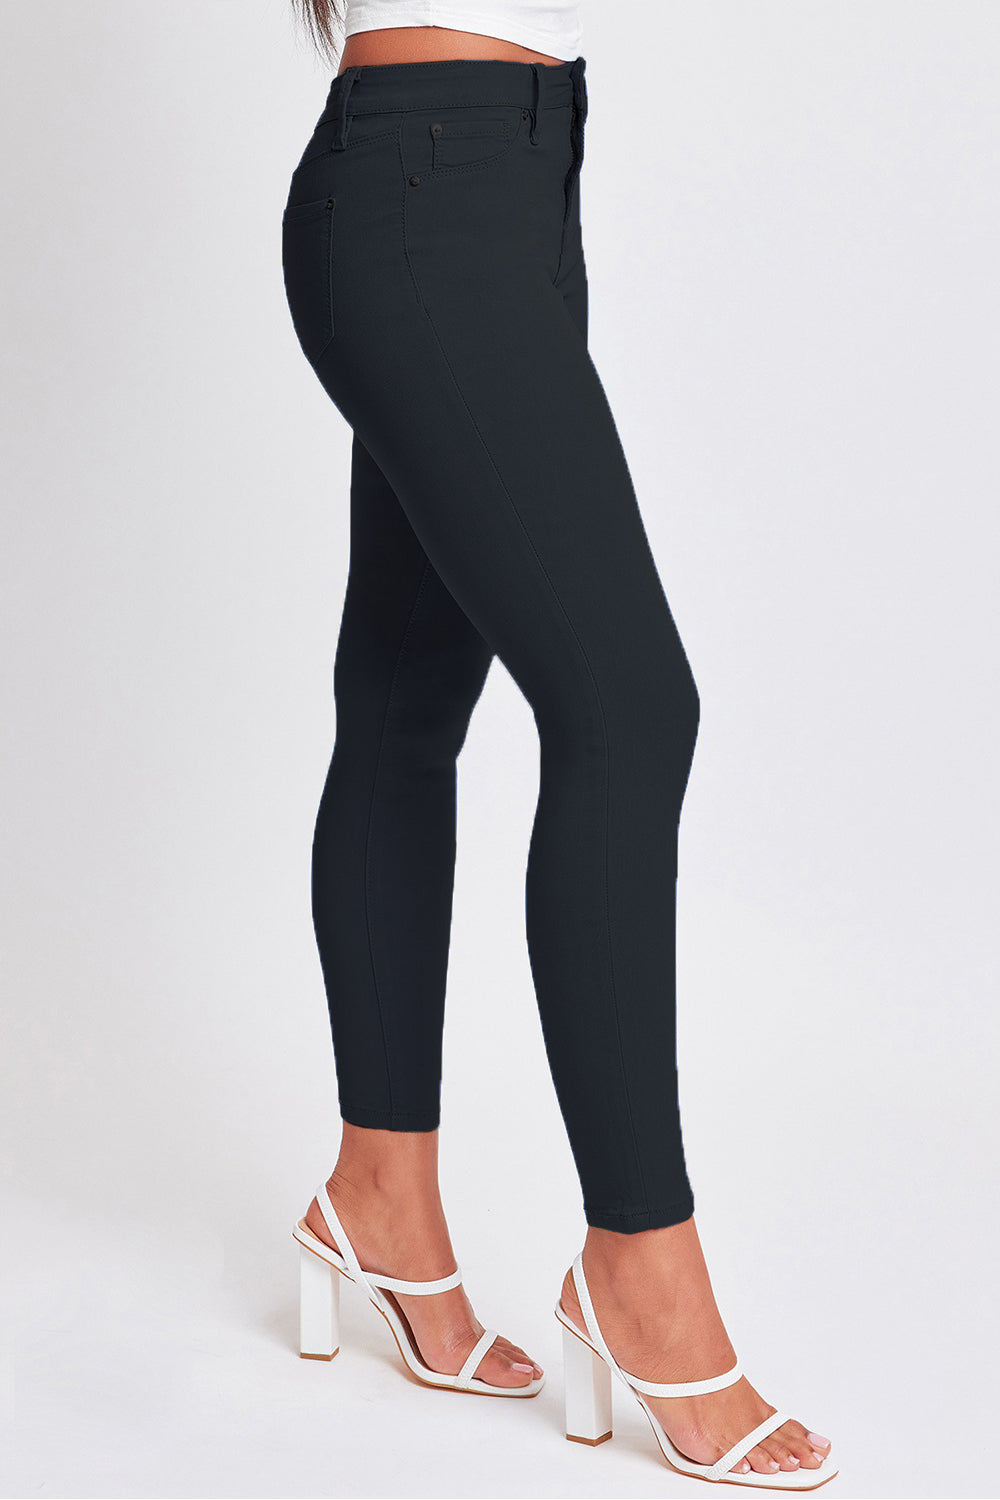 YMI Jeanswear Full Size Hyperstretch Mid-Rise Skinny Pants  | KIKI COUTURE